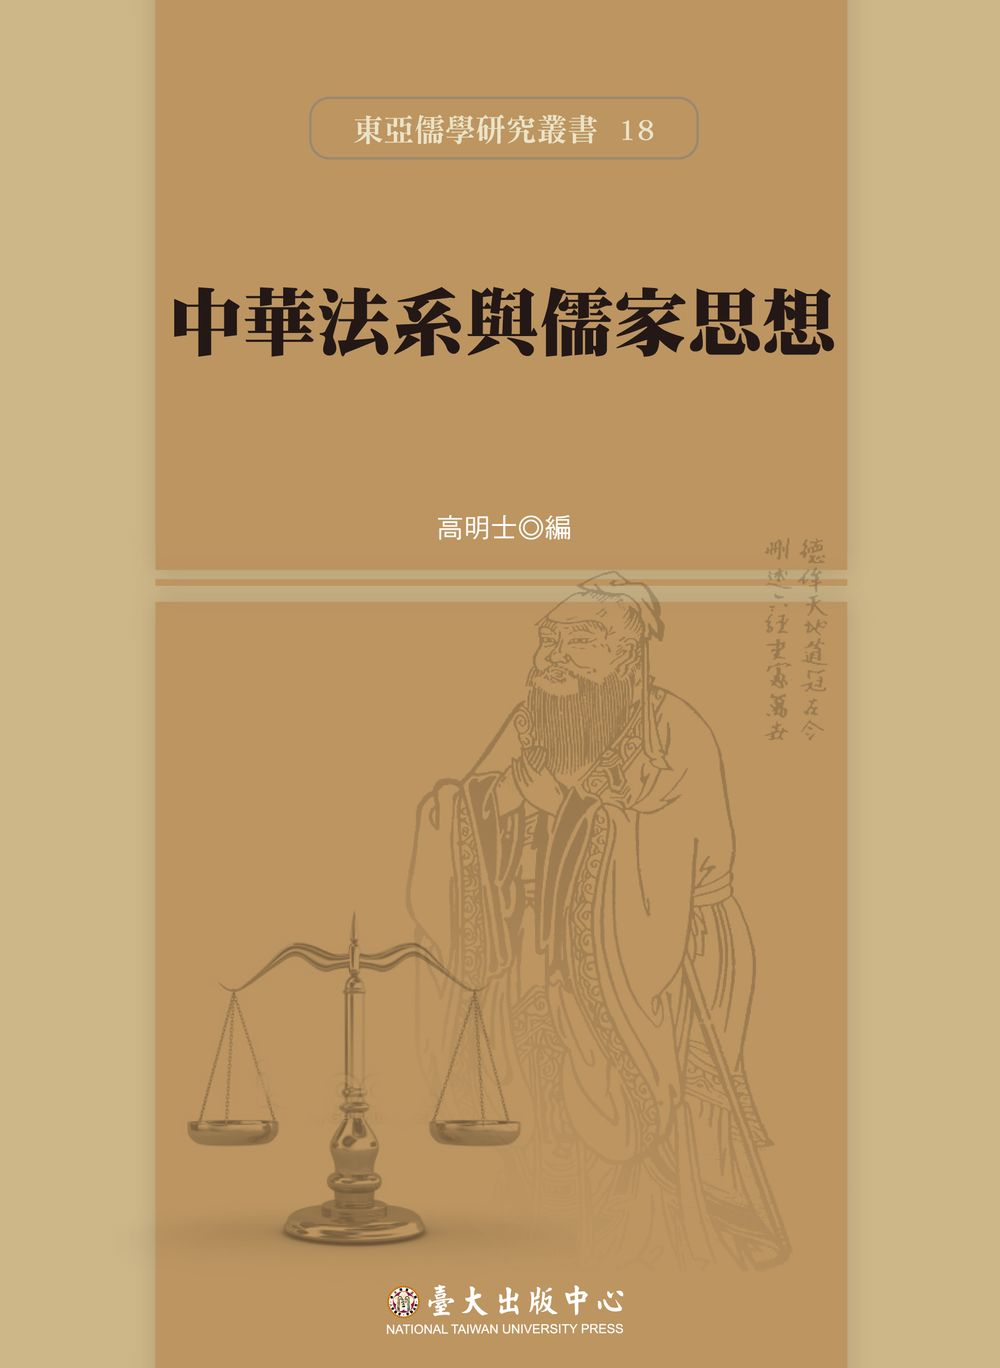 The Chinese Legal System and Confucian Thought